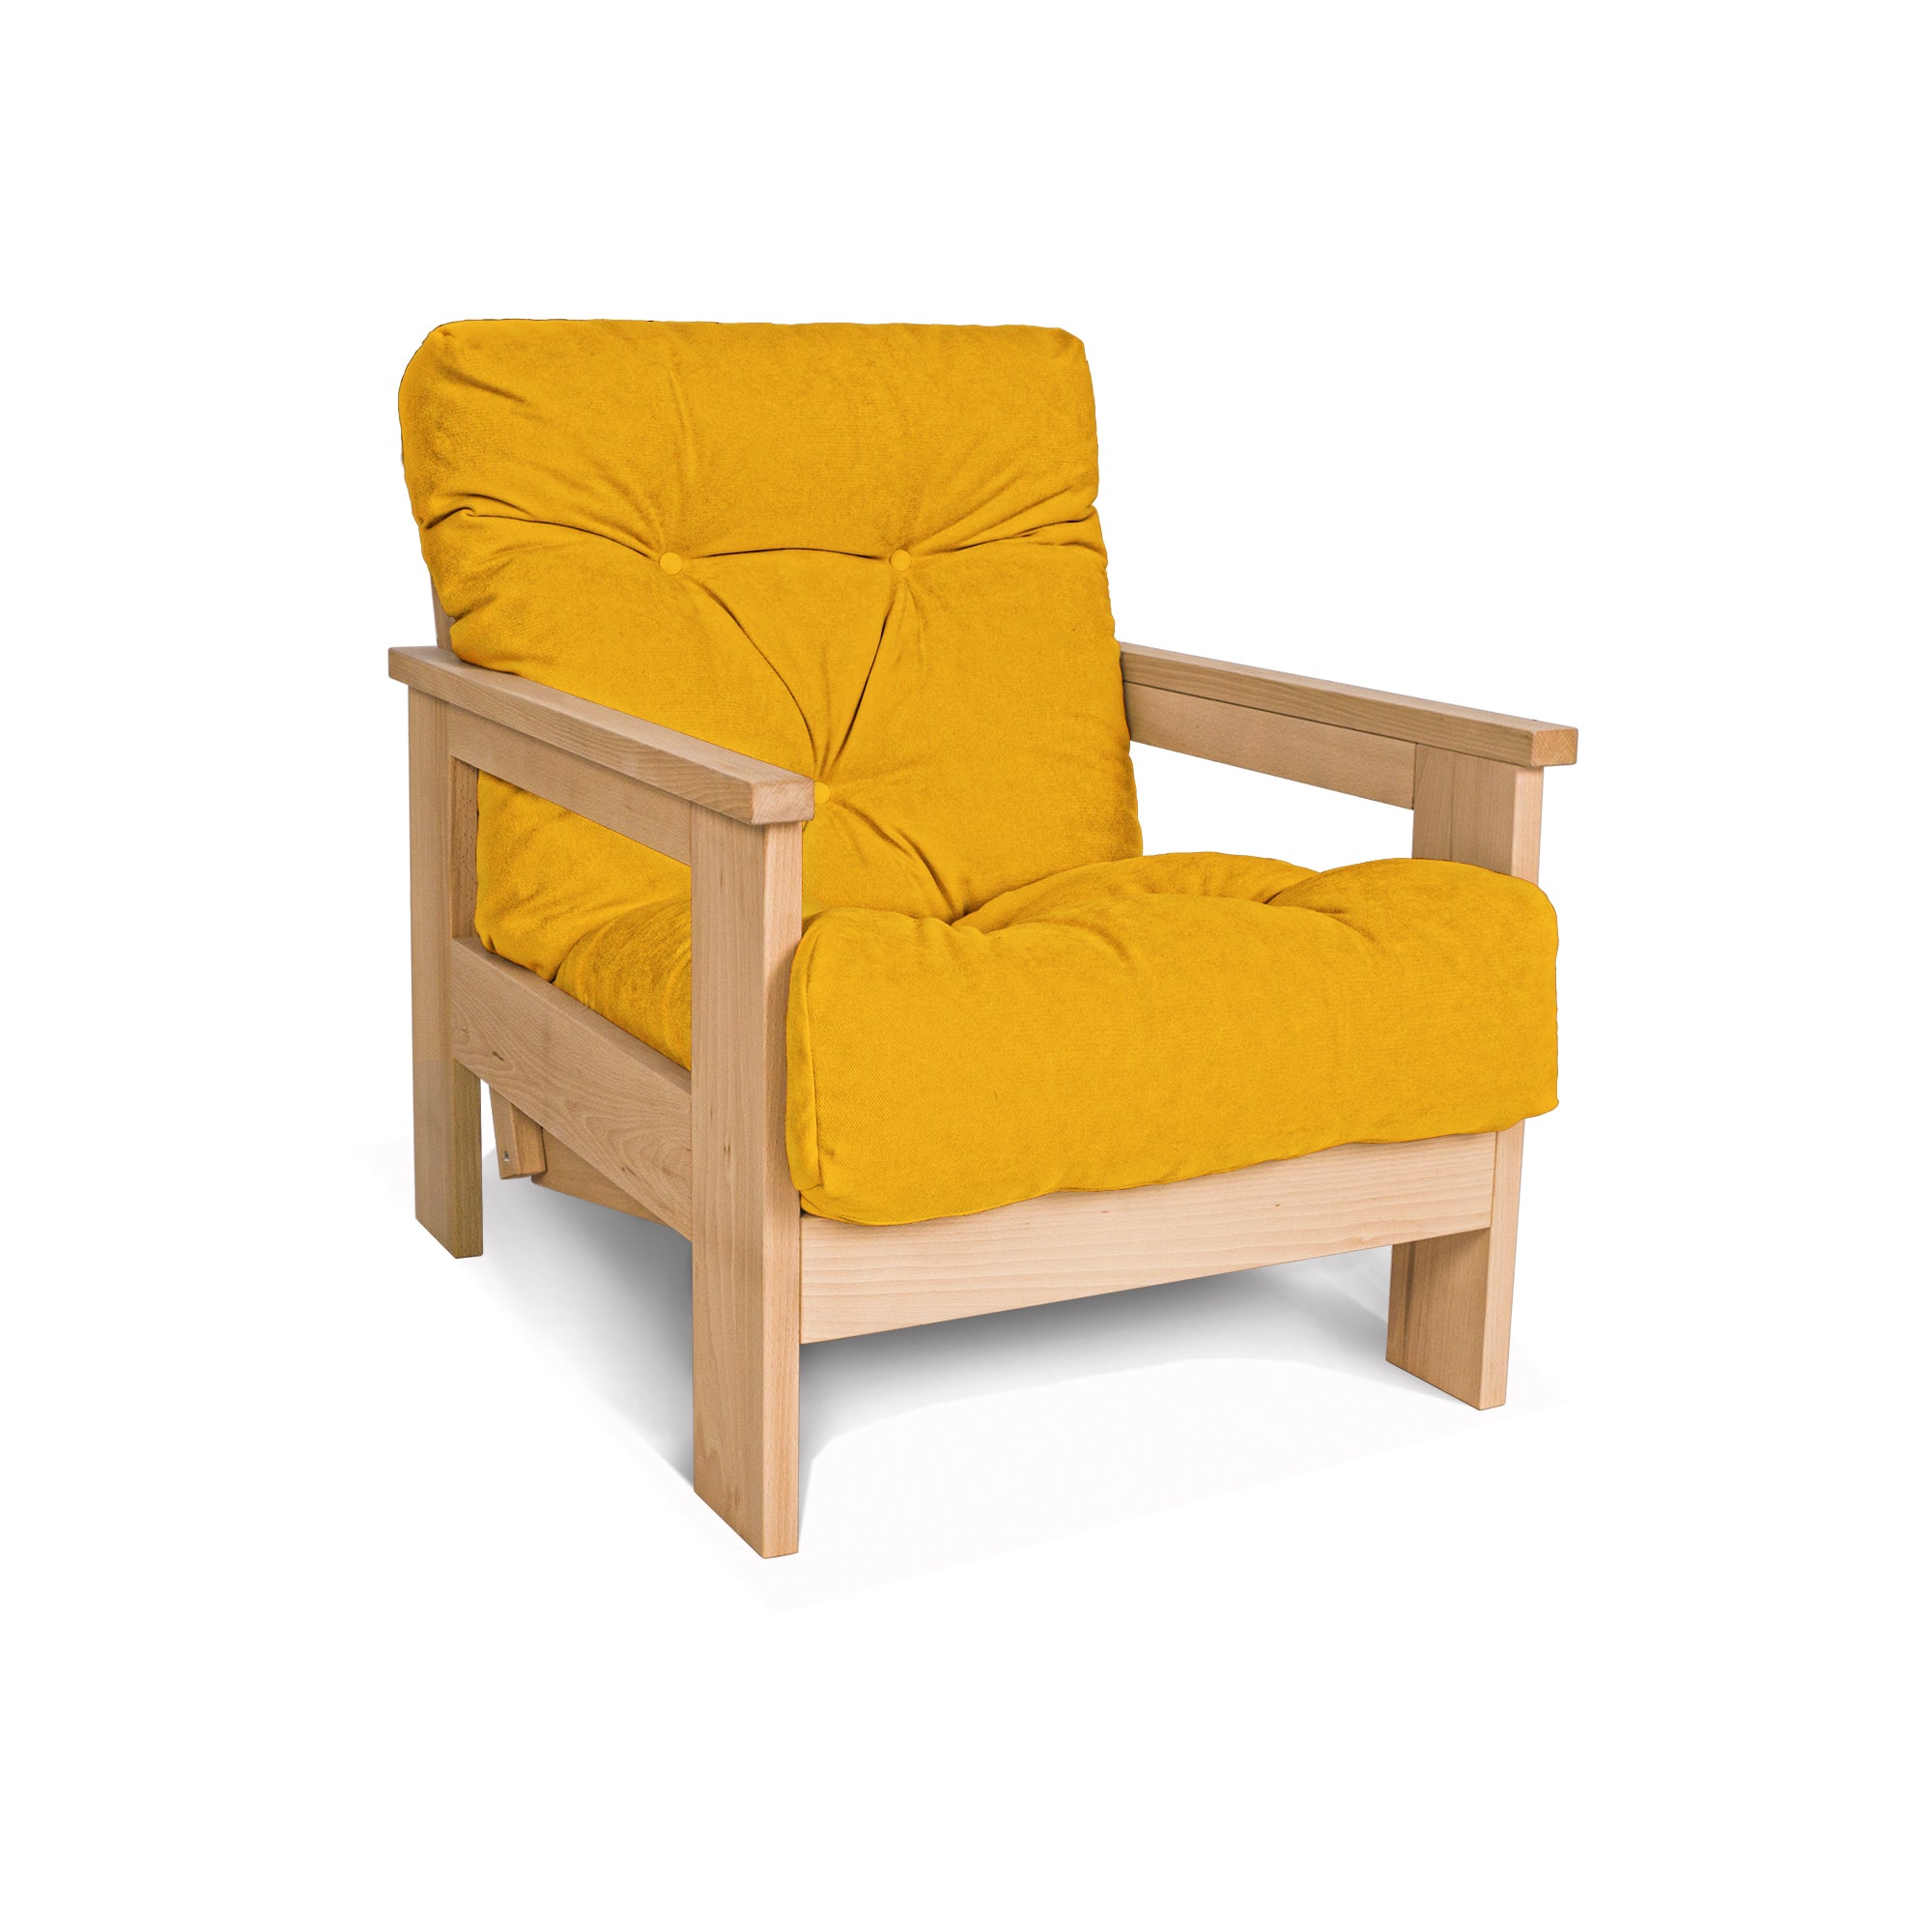 MEXICO Armchair, Beech Wood Frame, Natural Colour-yellow fabric